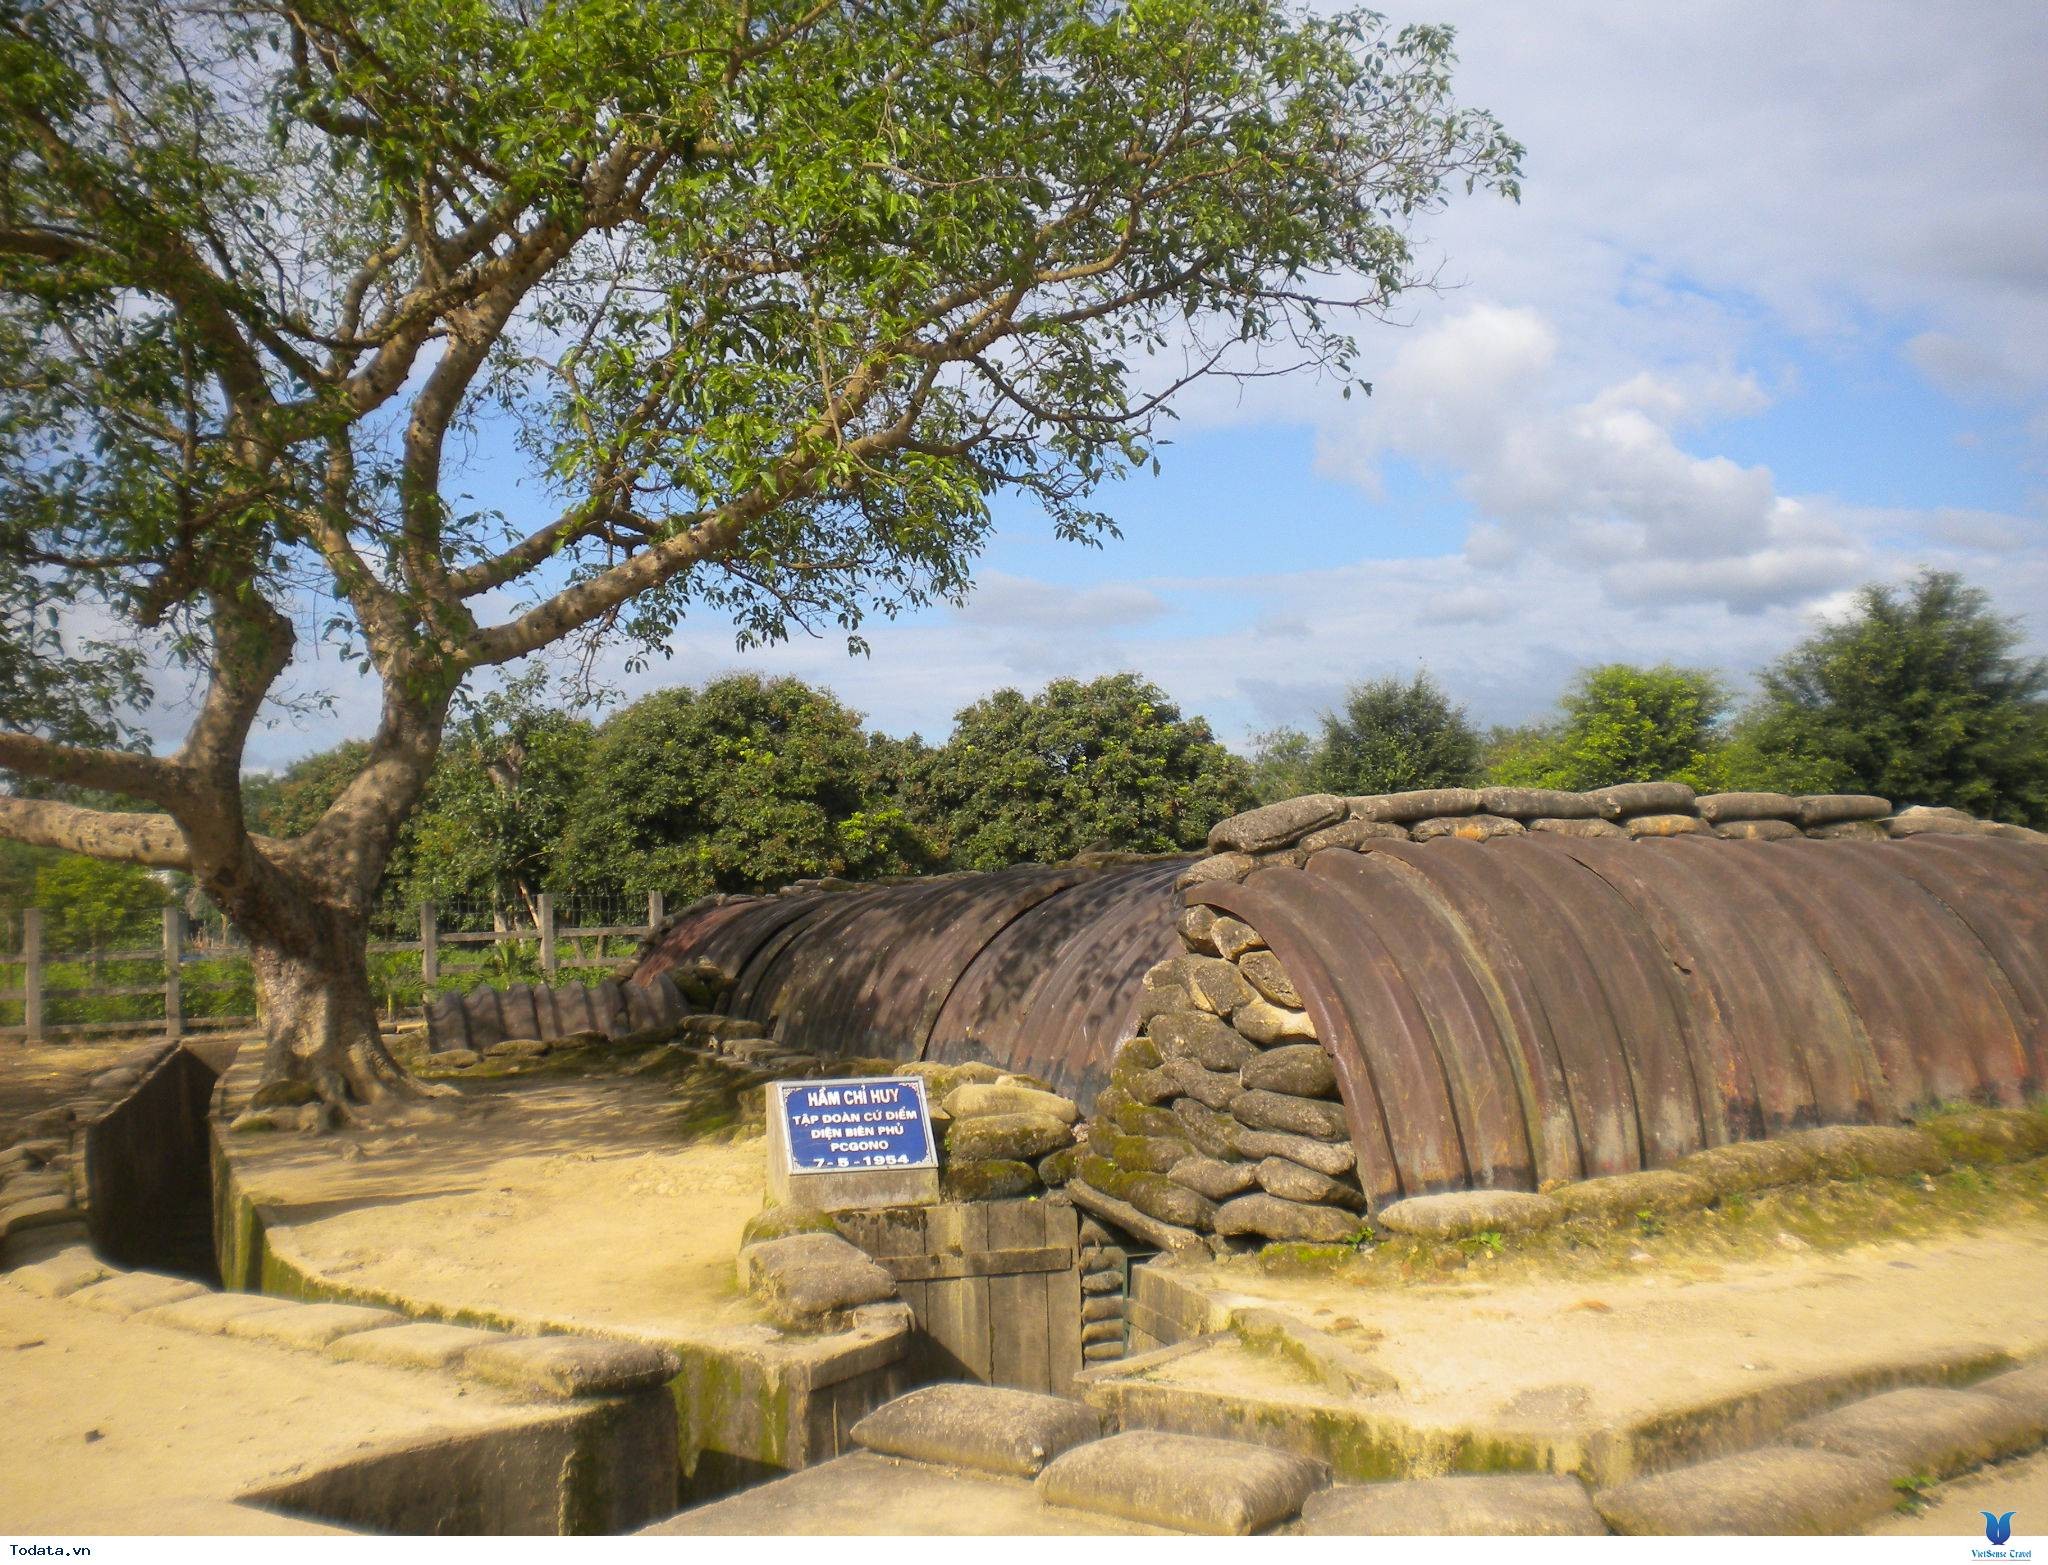 Discover Dien Bien Phu, the Famous Historic Place and the Battlefields